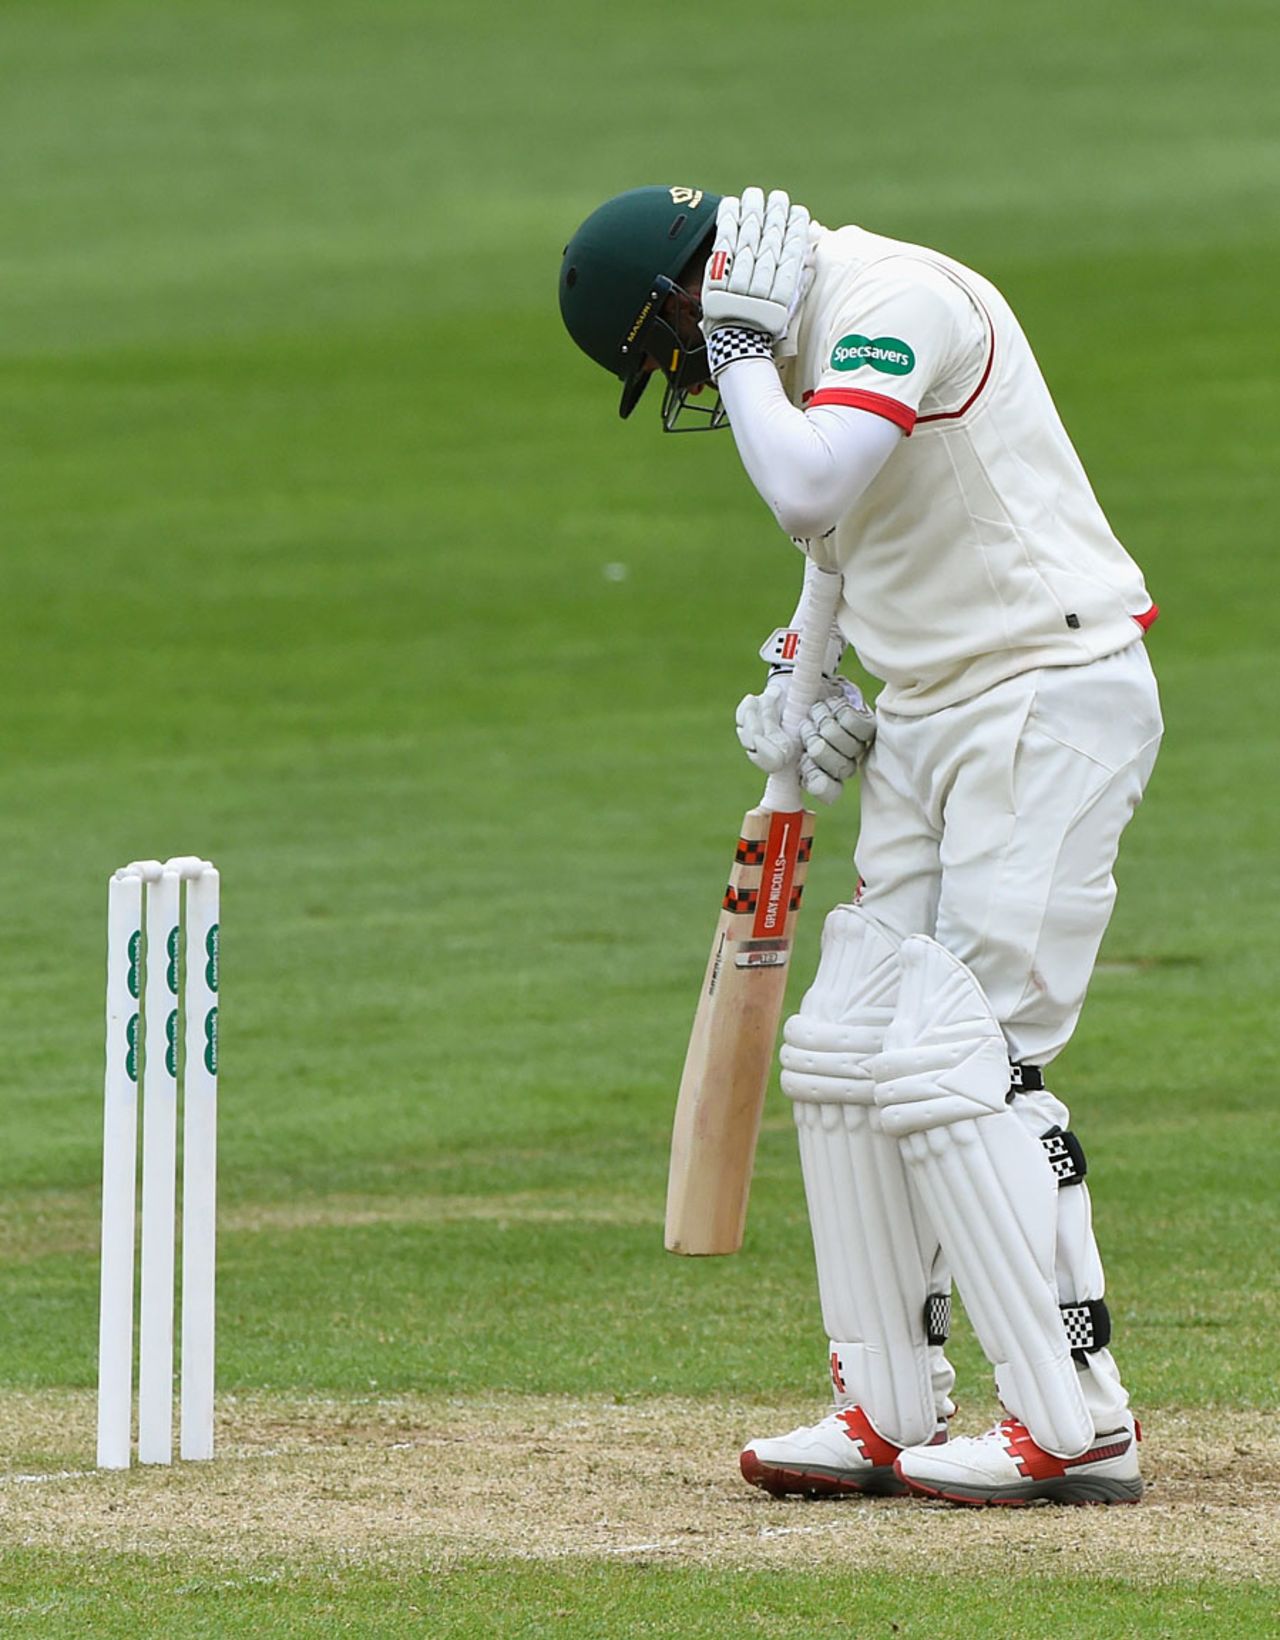 Paul Horton took a blow on the back of the head, Glamorgan v Leicestershire, Specsavers County Championship, Division Two, Cardiff, 2nd day, April 18, 2016